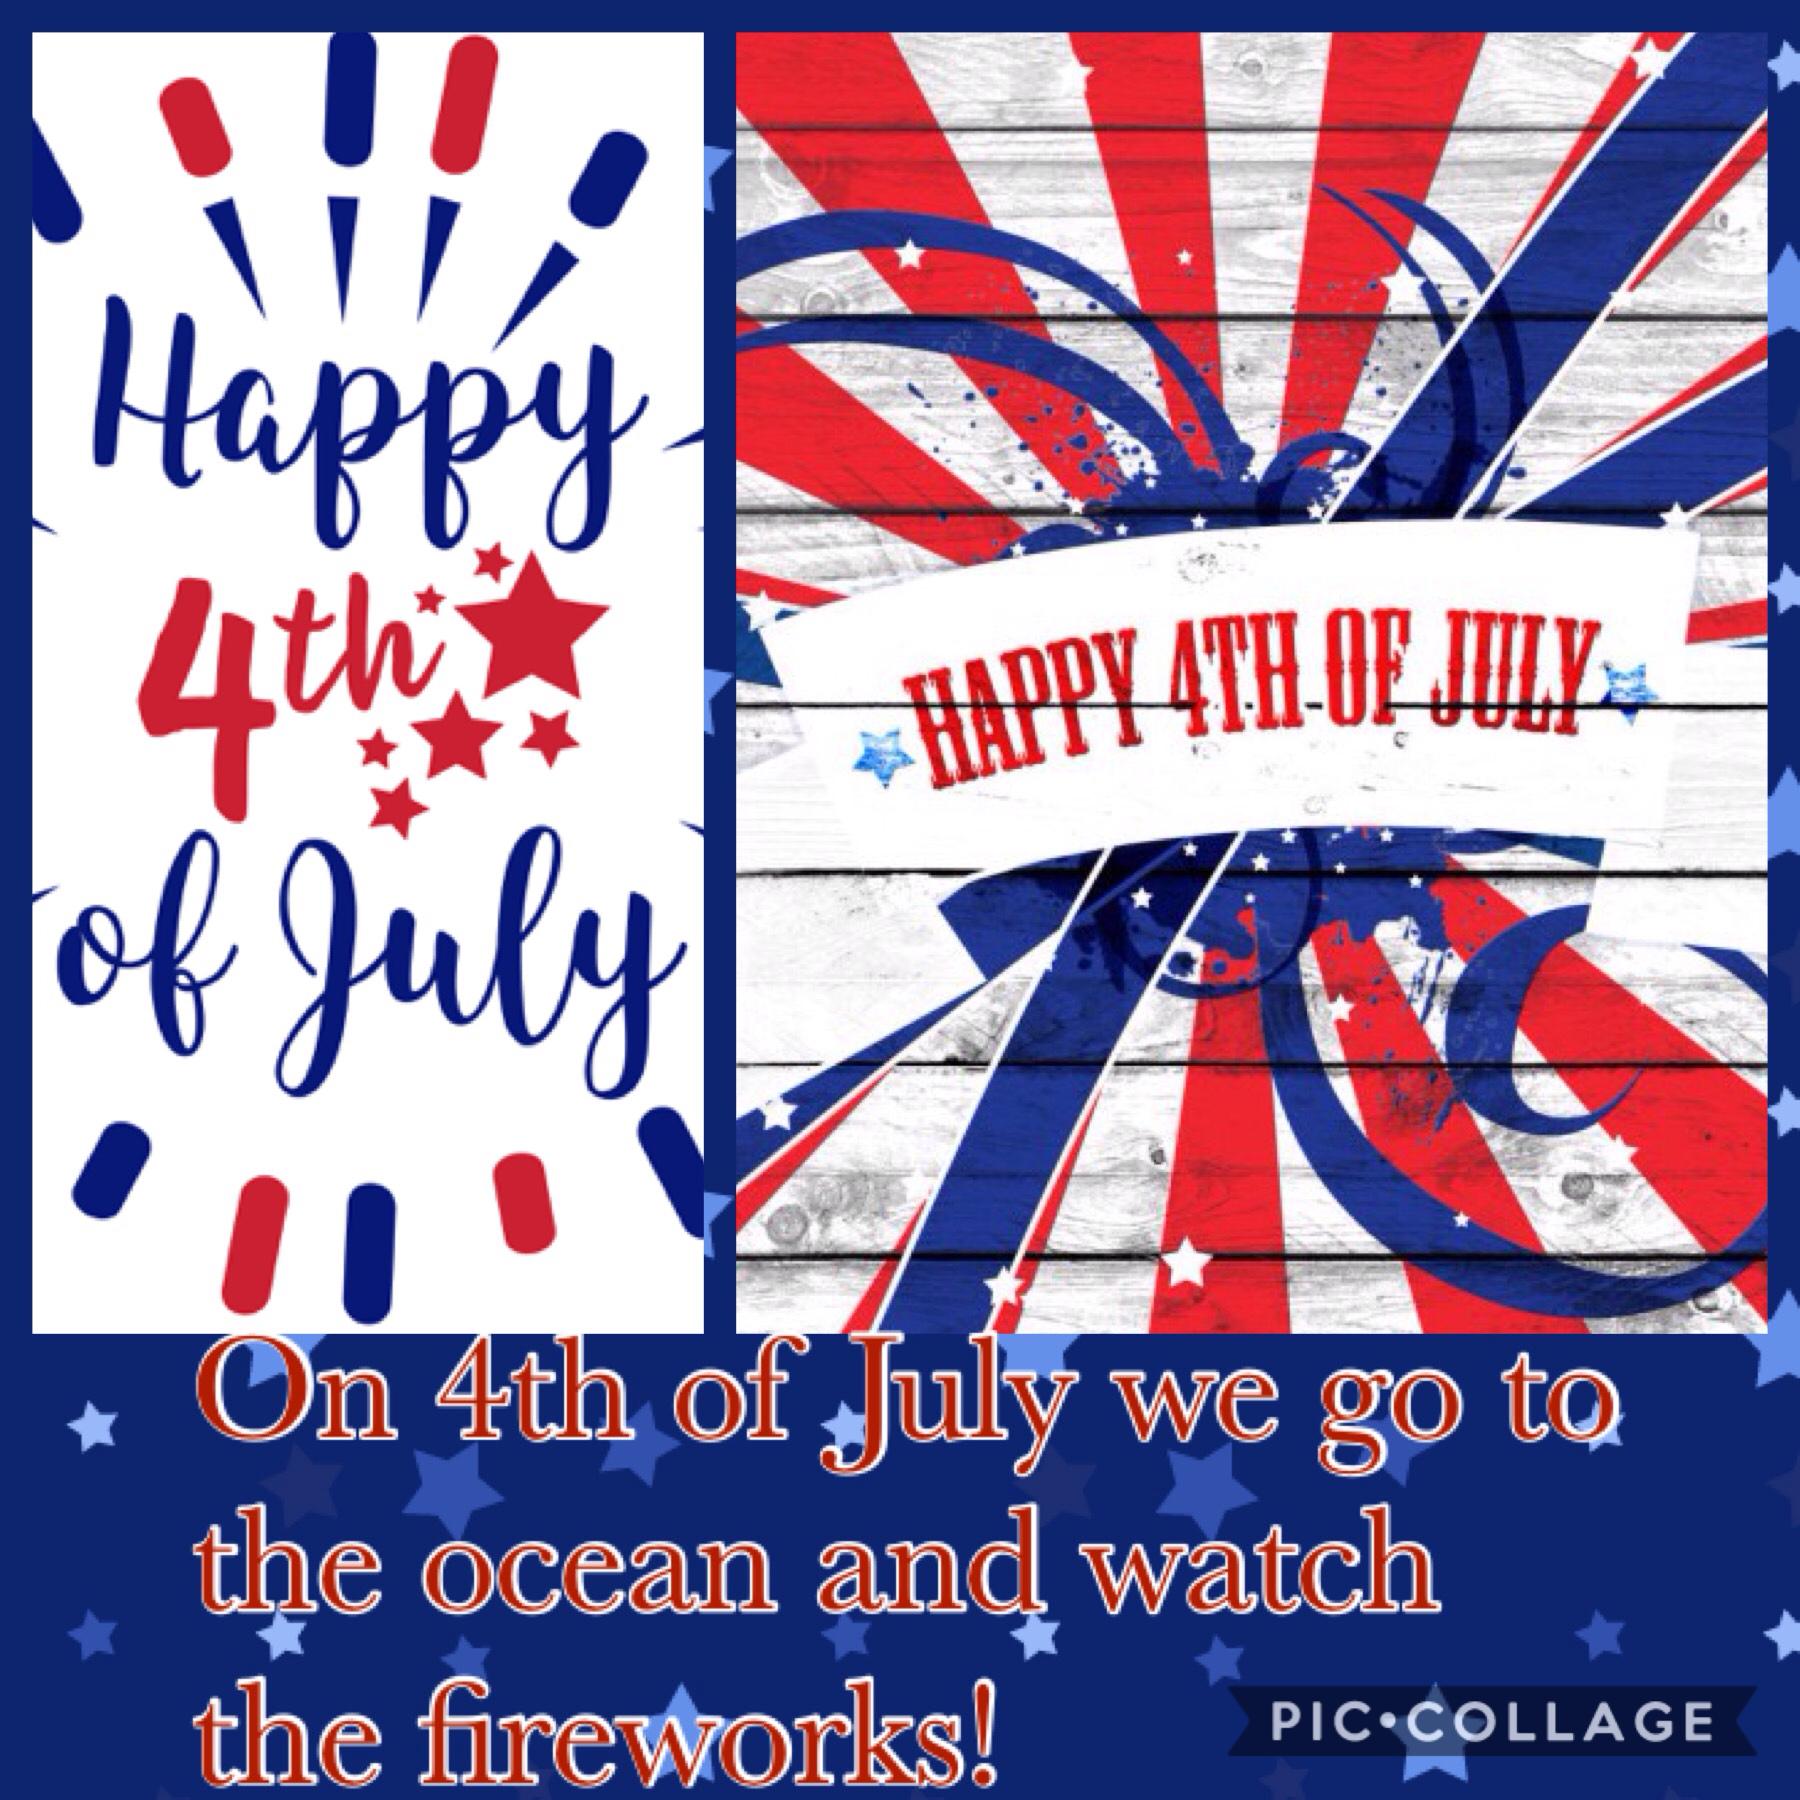 Comment bellow what you do on 4th of July!!❤️💙🇱🇷